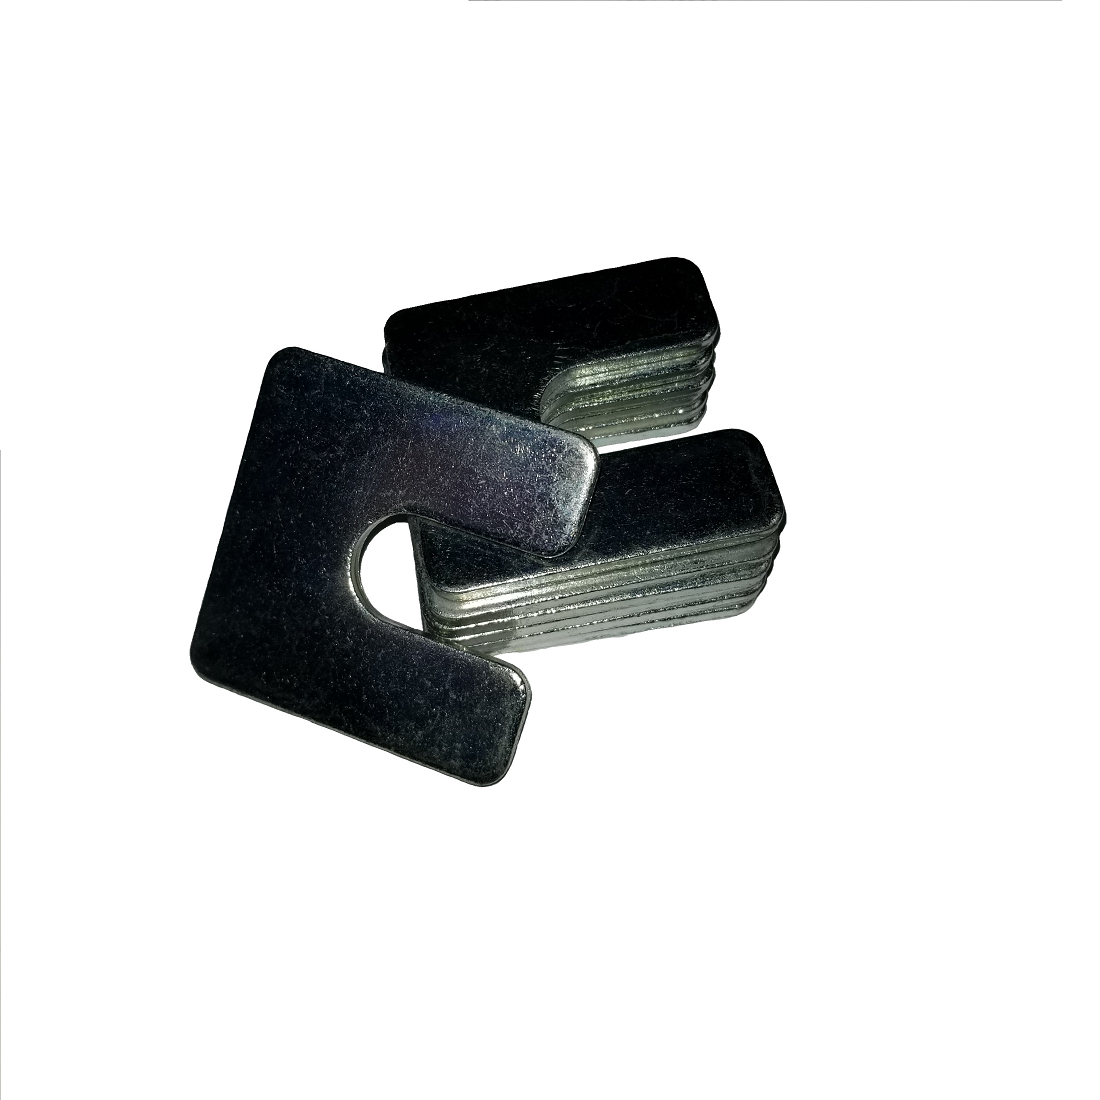 Square ID Washer - 0.337 ID, 0.756 OD, 0.082 Thick, Low Carbon Steel - Soft